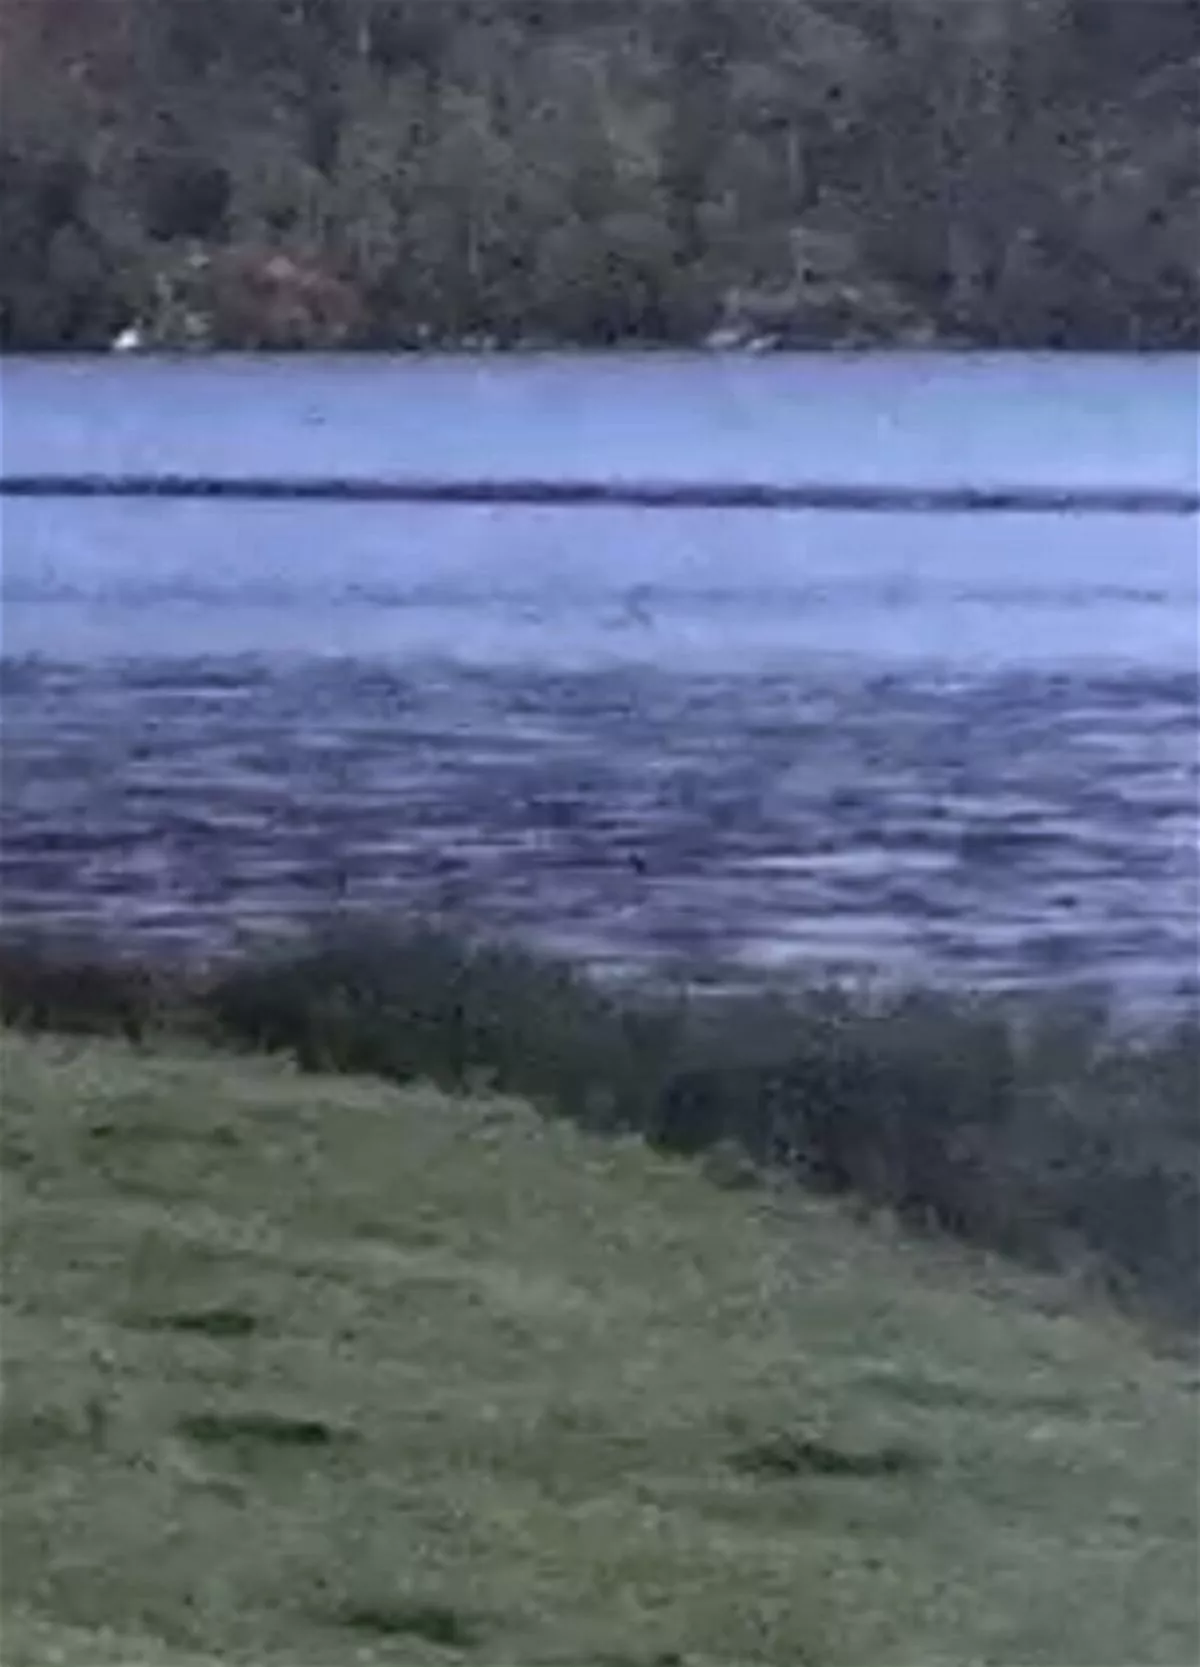 Loch Ness Monster's 'head and neck' spotted in new footage (2)